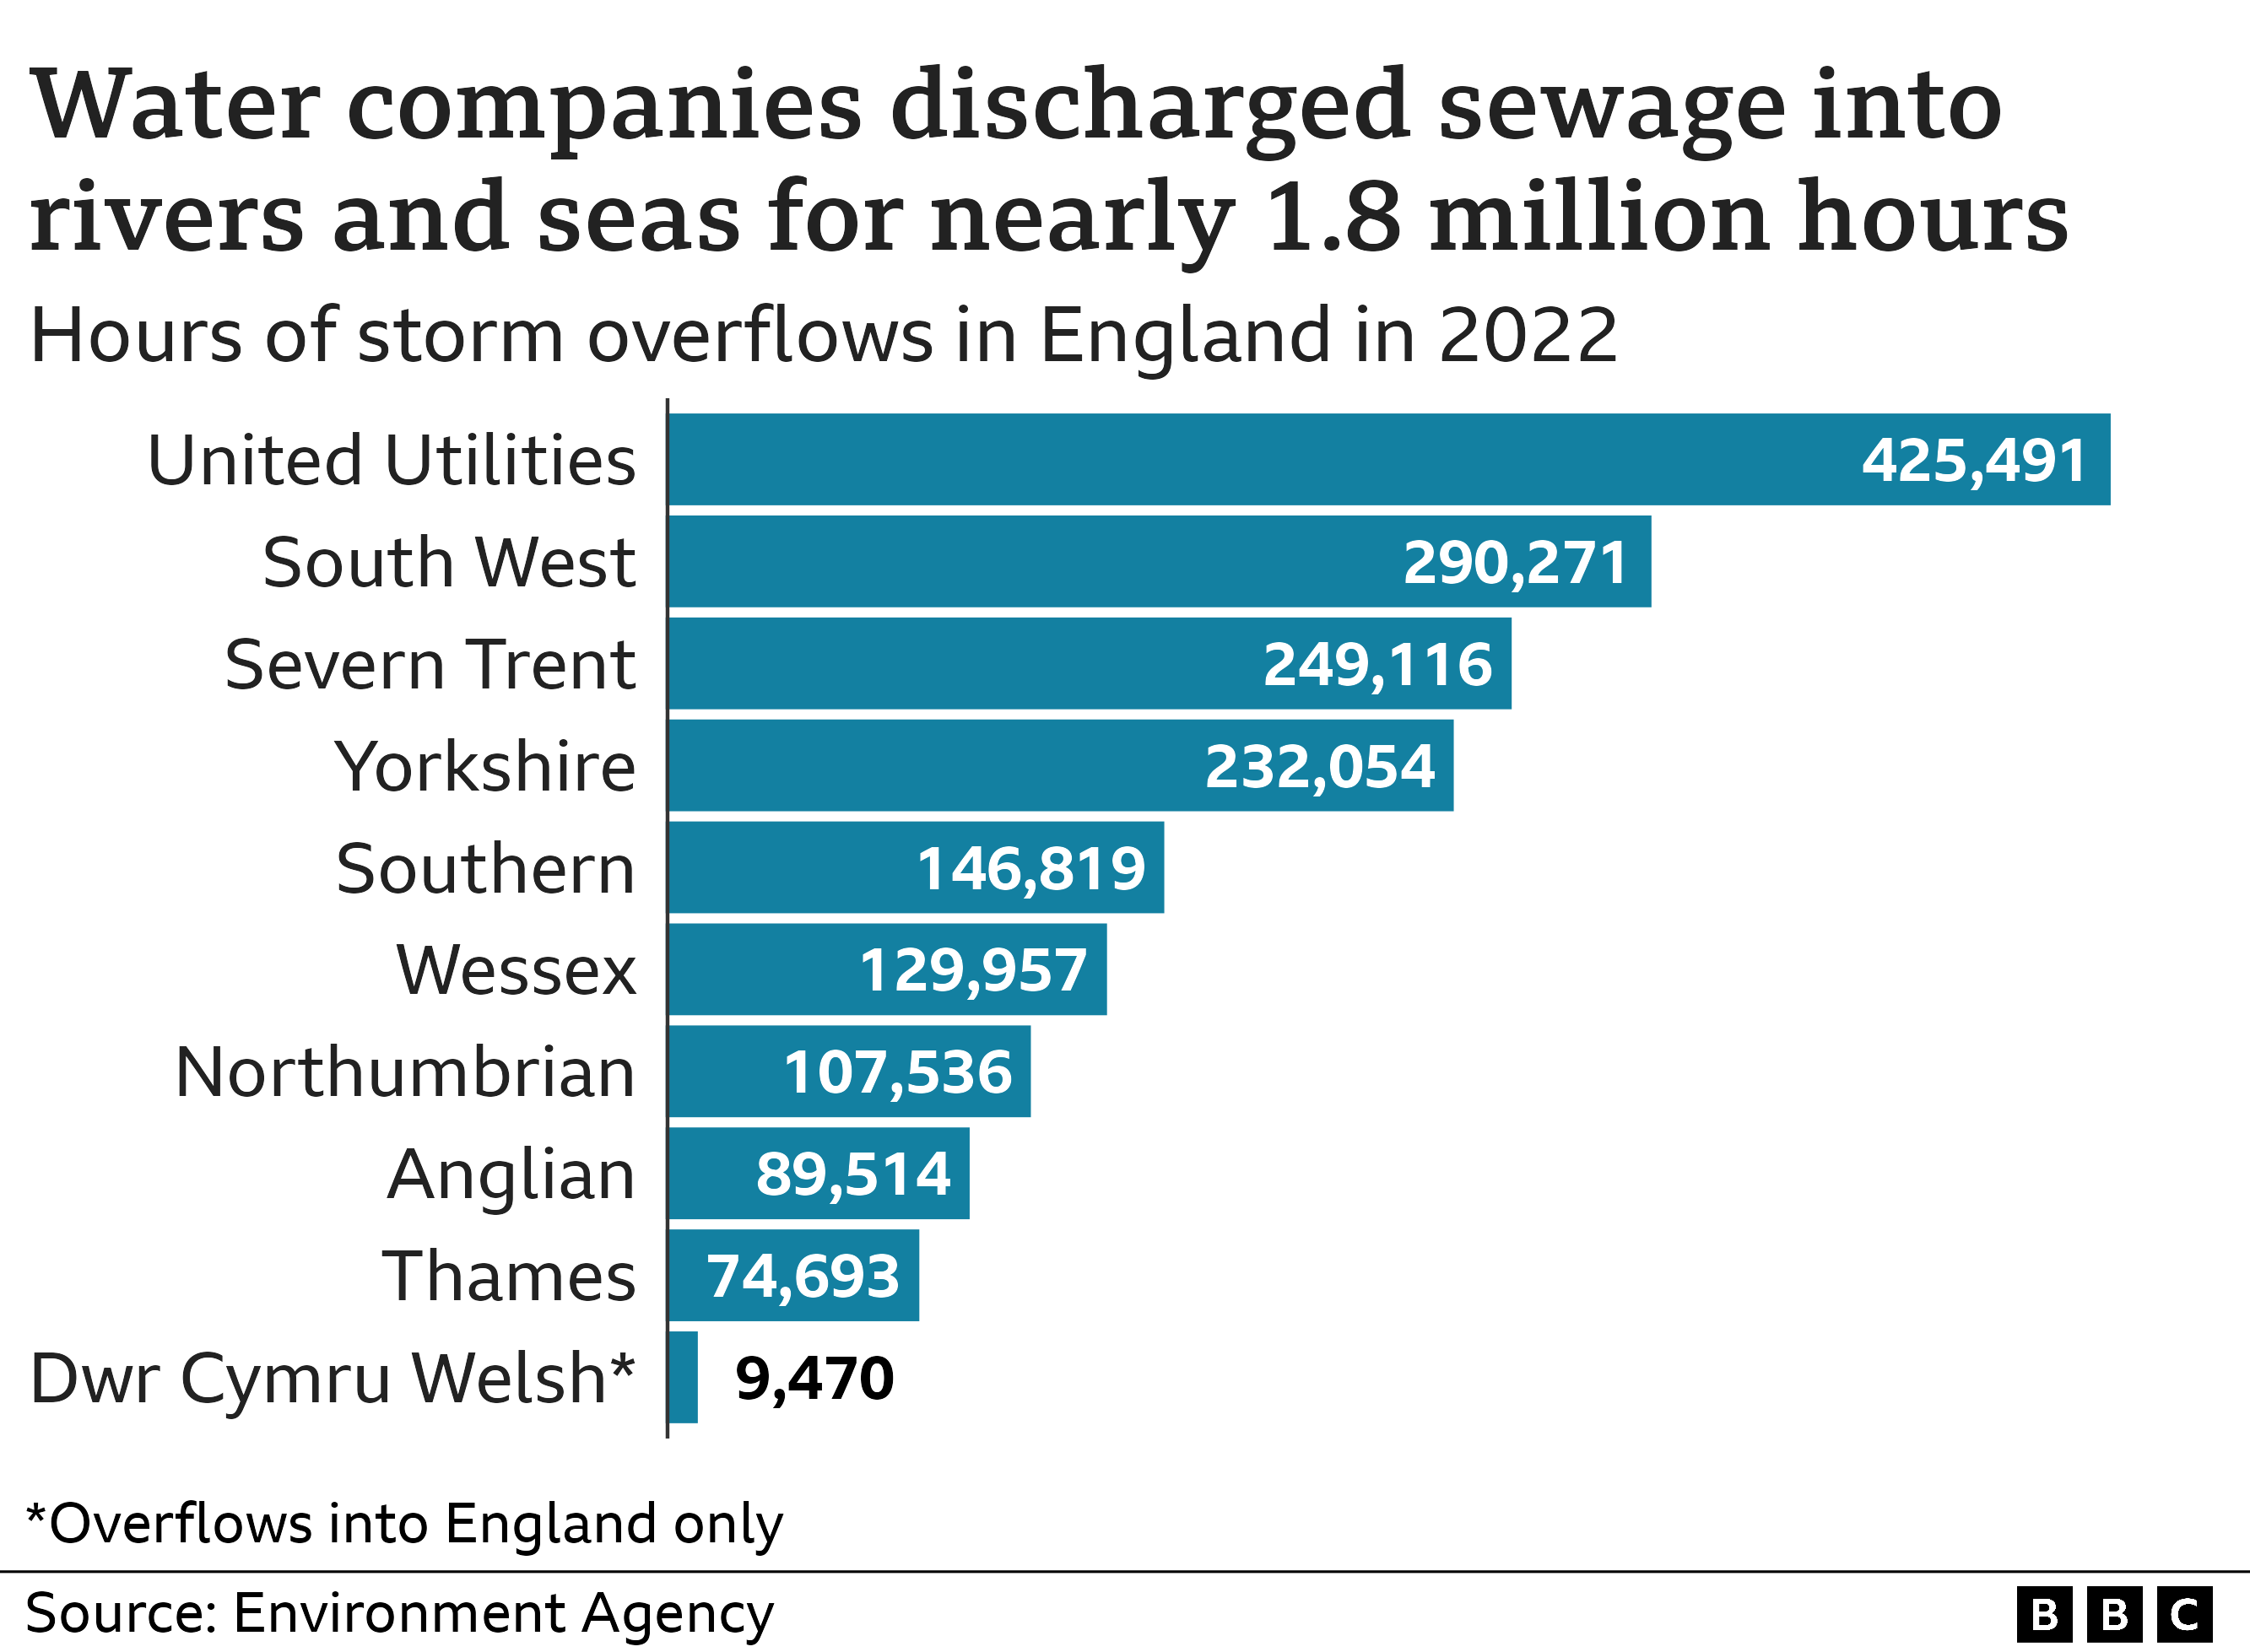 Chart showing water companies discharged sewage into rivers and seas in England for nearly 1.8m hours in 2022, with United Utilities at about 425,000 hours, South West Water 290,000, Severn 249,000, Yorkshire 232,000, Southern 147,000, Wessex 130,000, Northumbrian 108,000, Anglian 90,000, Thames 75,000 and Dyr Cymru Welsh 9,000